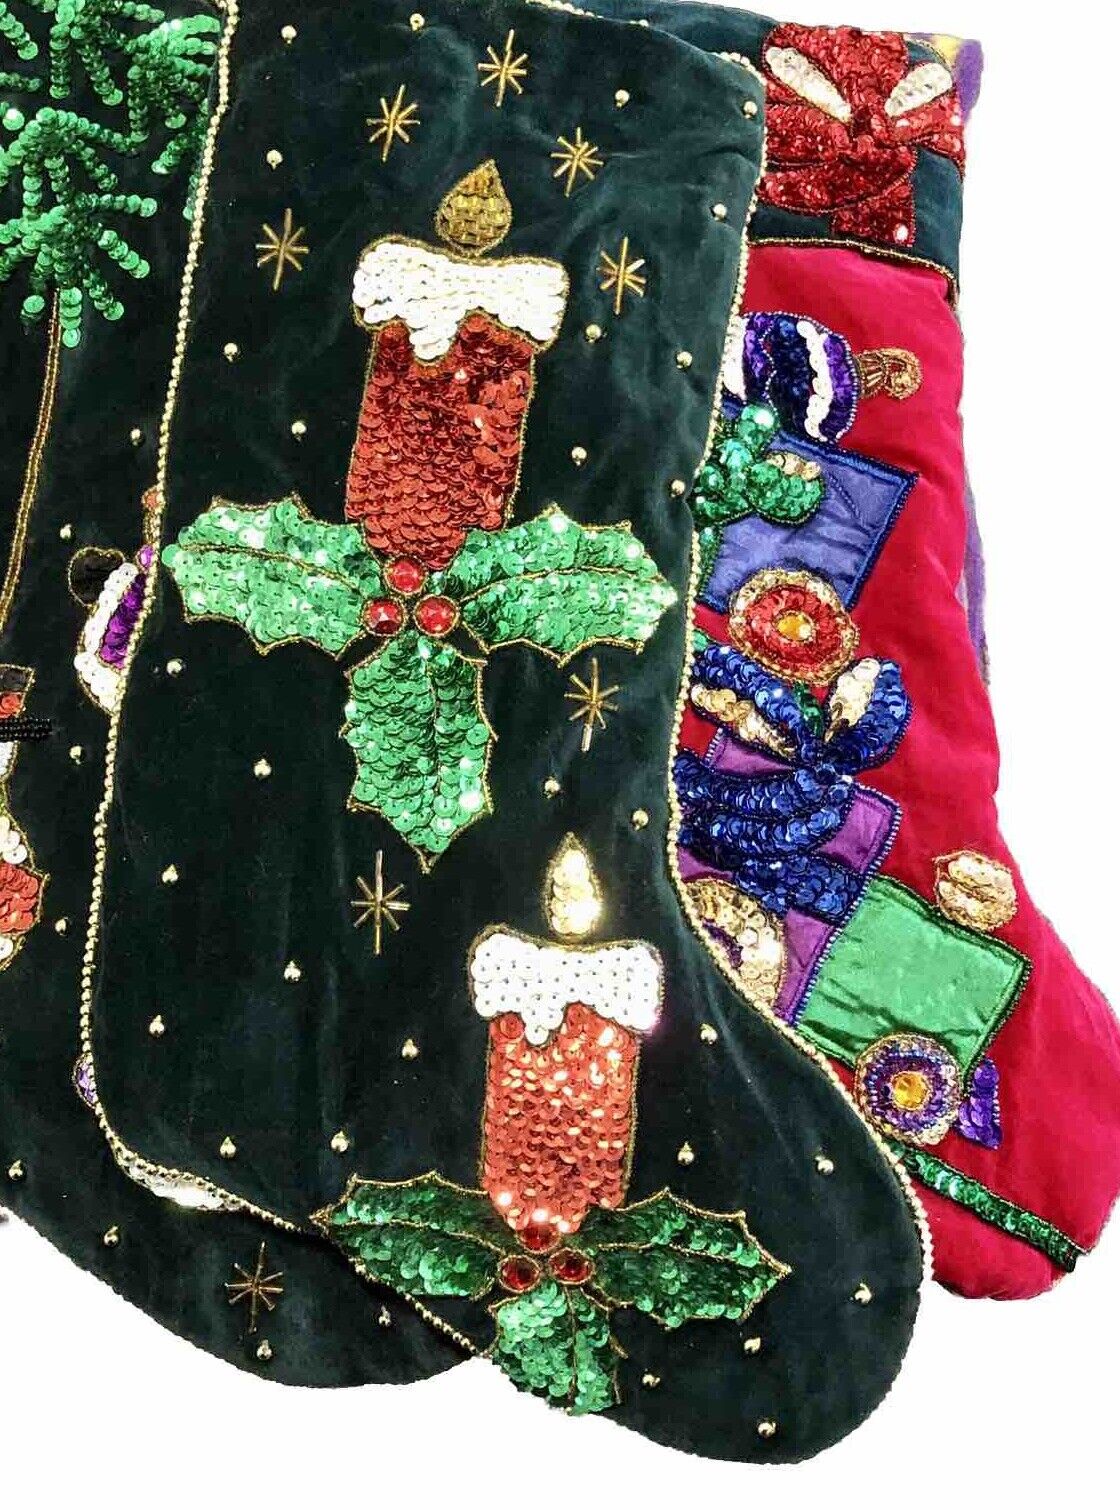 3 Vintage Velvet Sequin Christmas Stockings Candle Snowman Toy 17”-18” 1998